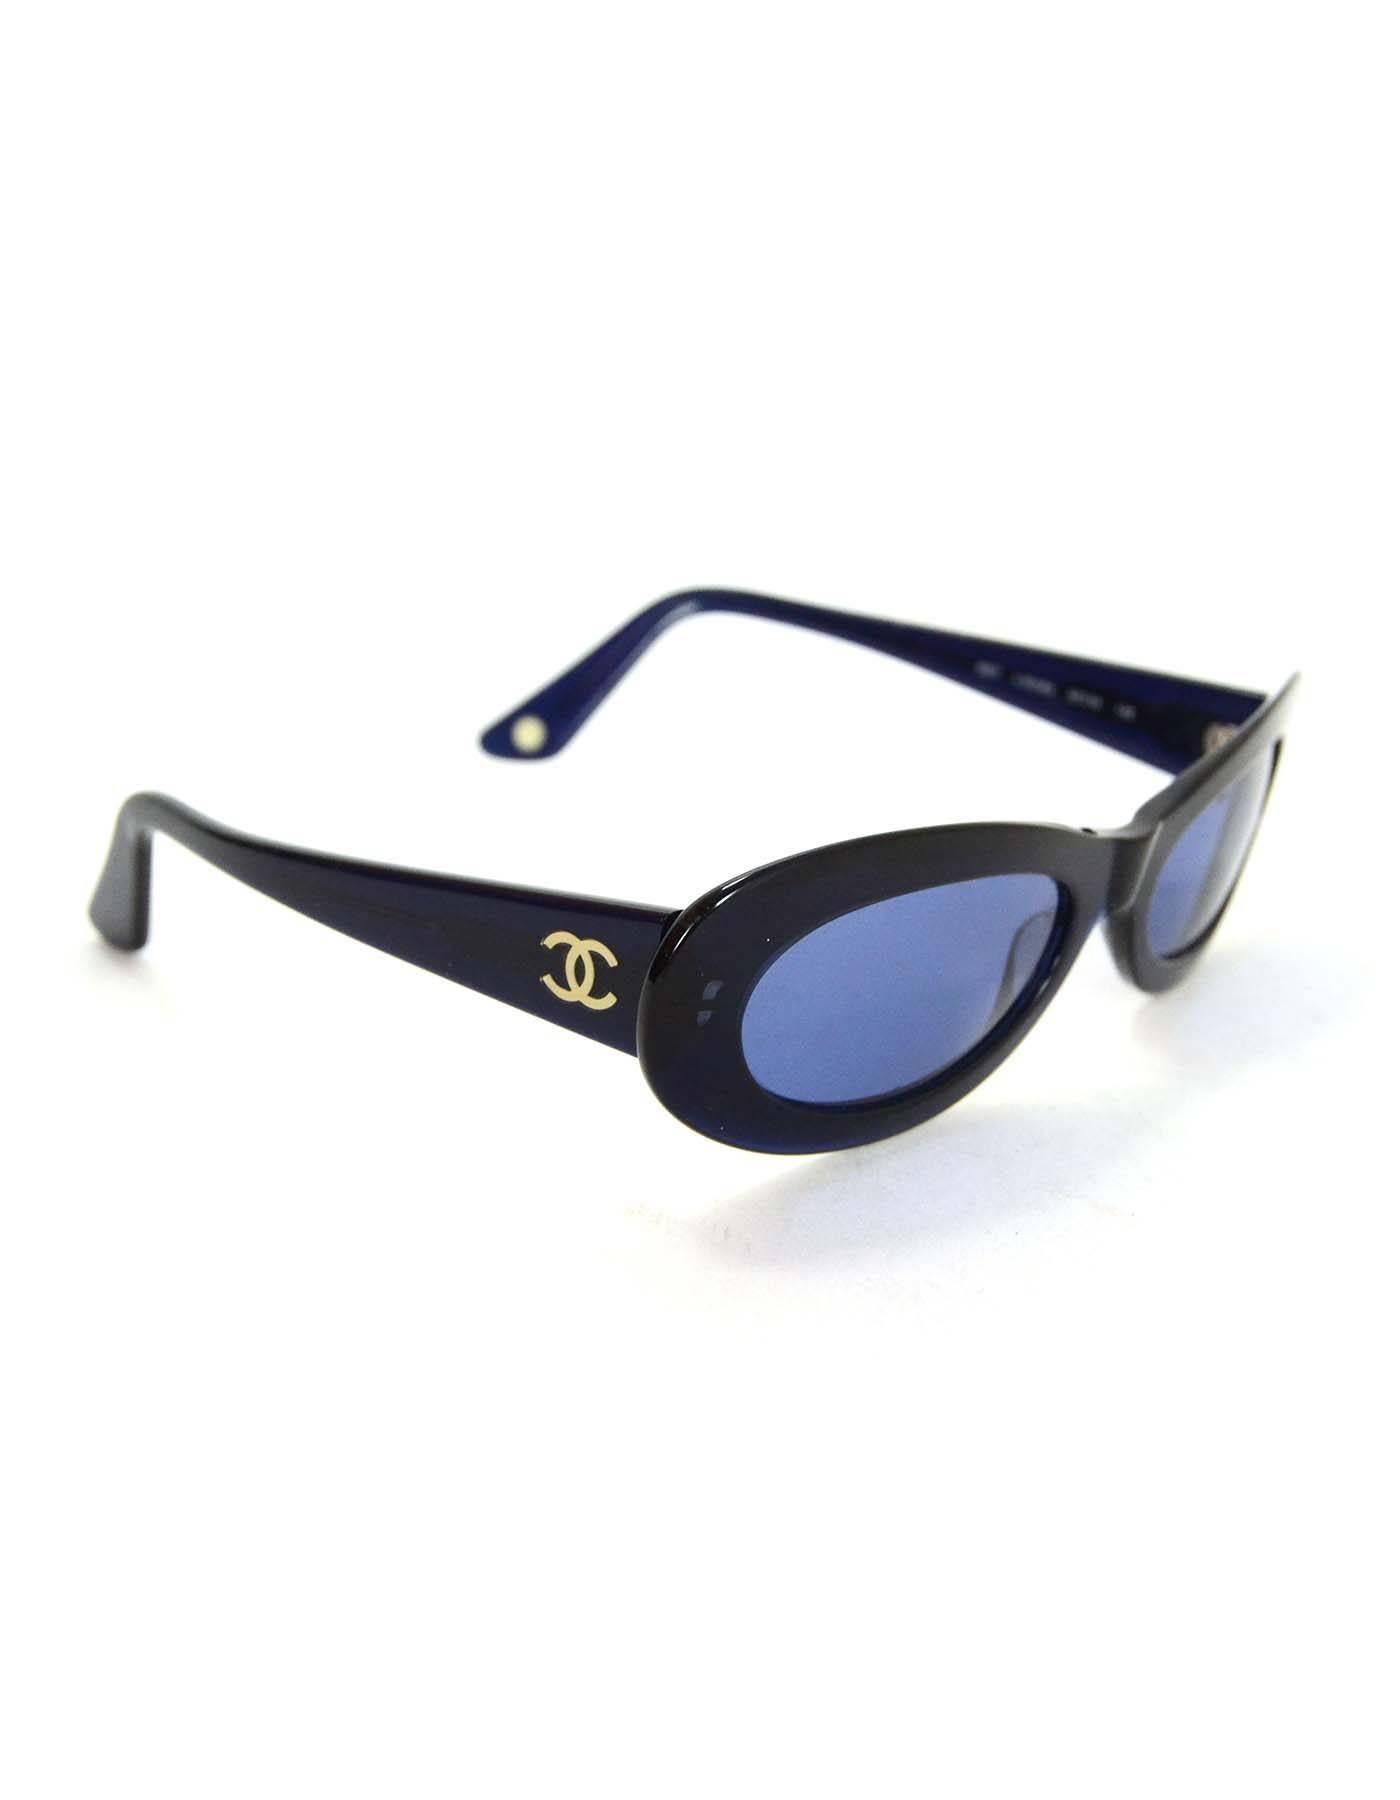 Chanel Blue Sunglasses with CC at Arms

Made In: Italy
Color: Blue
Materials: Resin
Overall Condition: Very good pre-owned condition with the exception of slightly bent arms and surface marks
Includes: Chanel case

Measurements:
Length